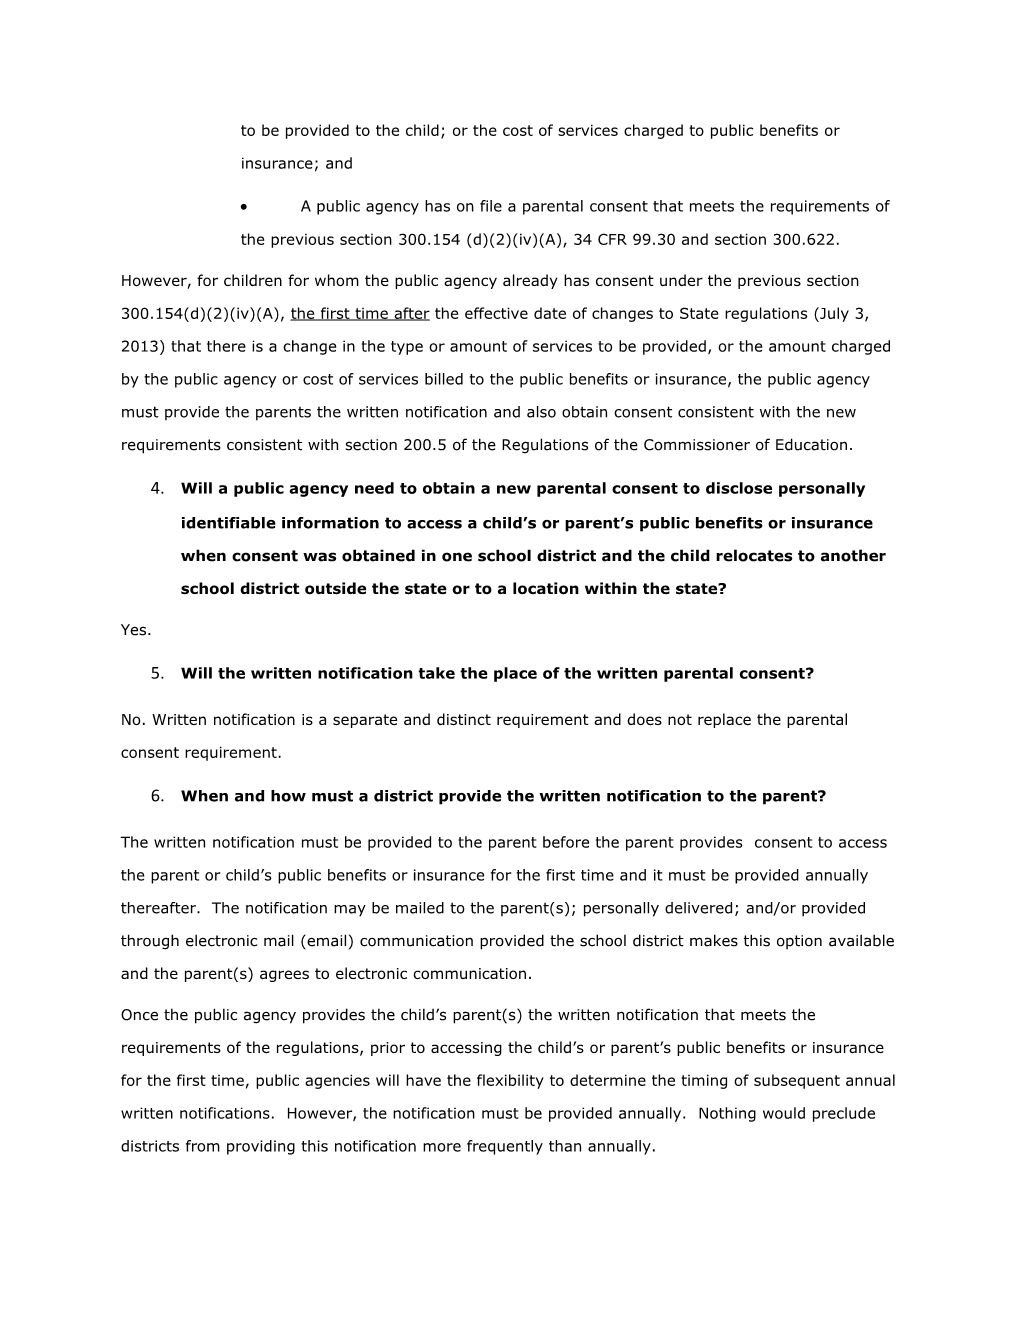 Questions and Answers Regarding Parental Consent and Notifications Requirements for Access